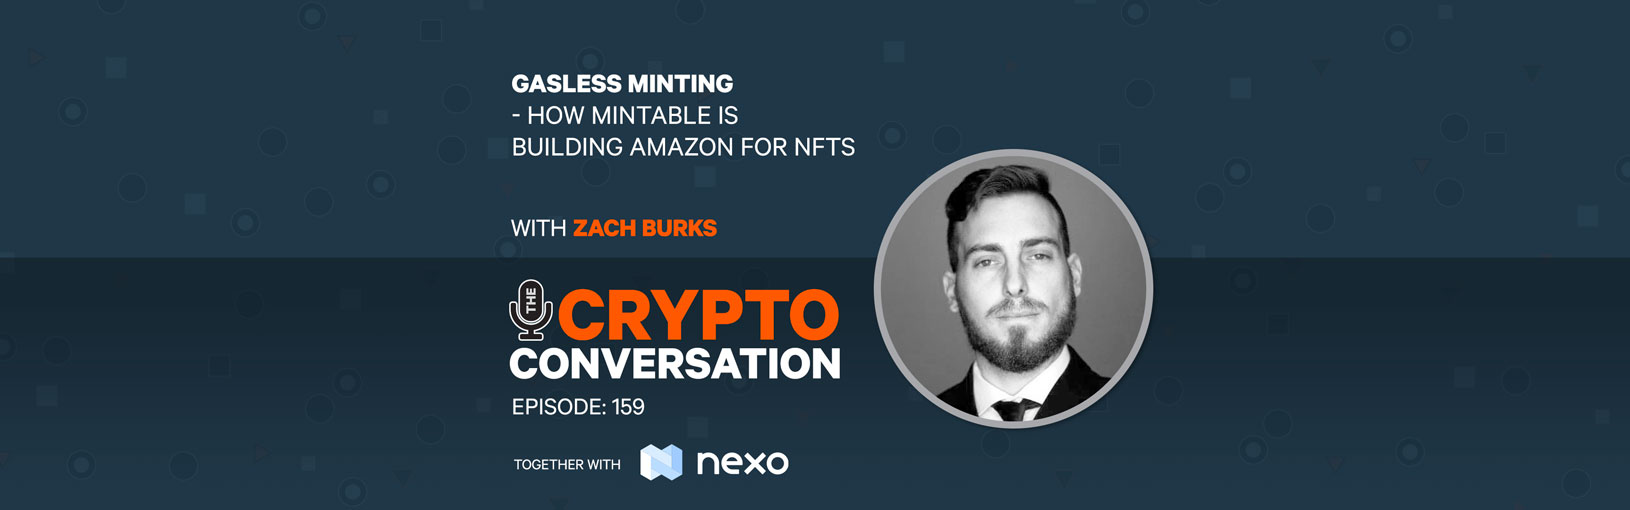 Gasless Minting – How Mintable is building Amazon for NFTs